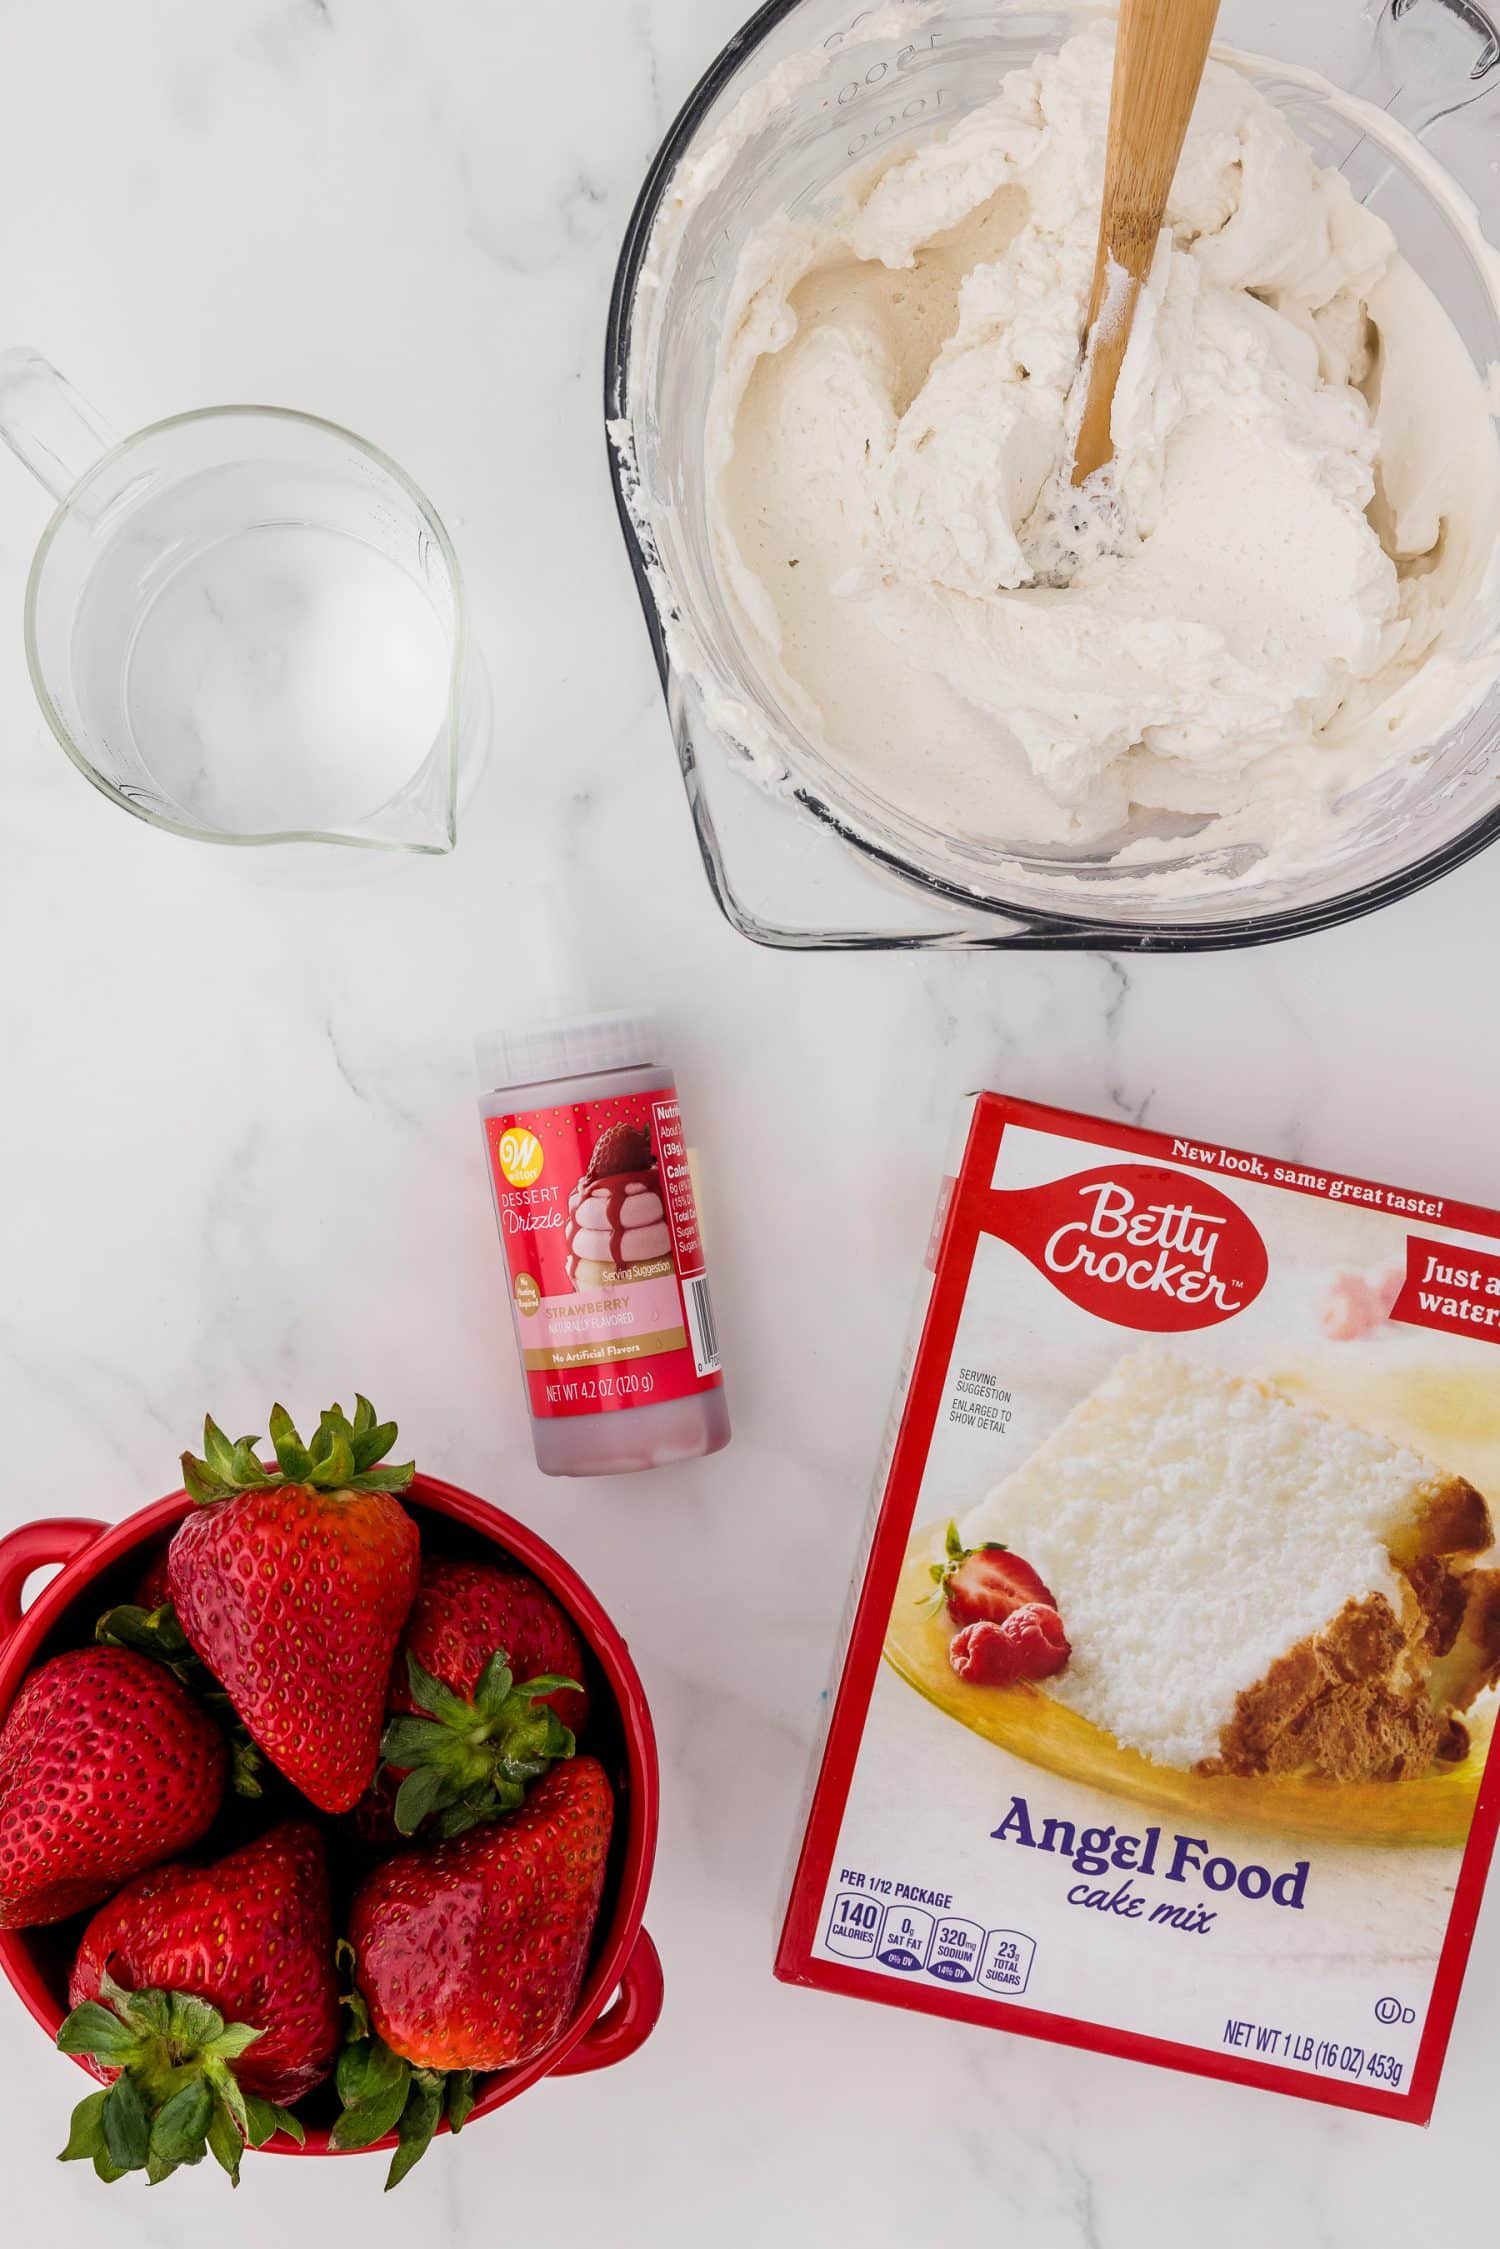 Ingredients for angel food cake on a white countertop